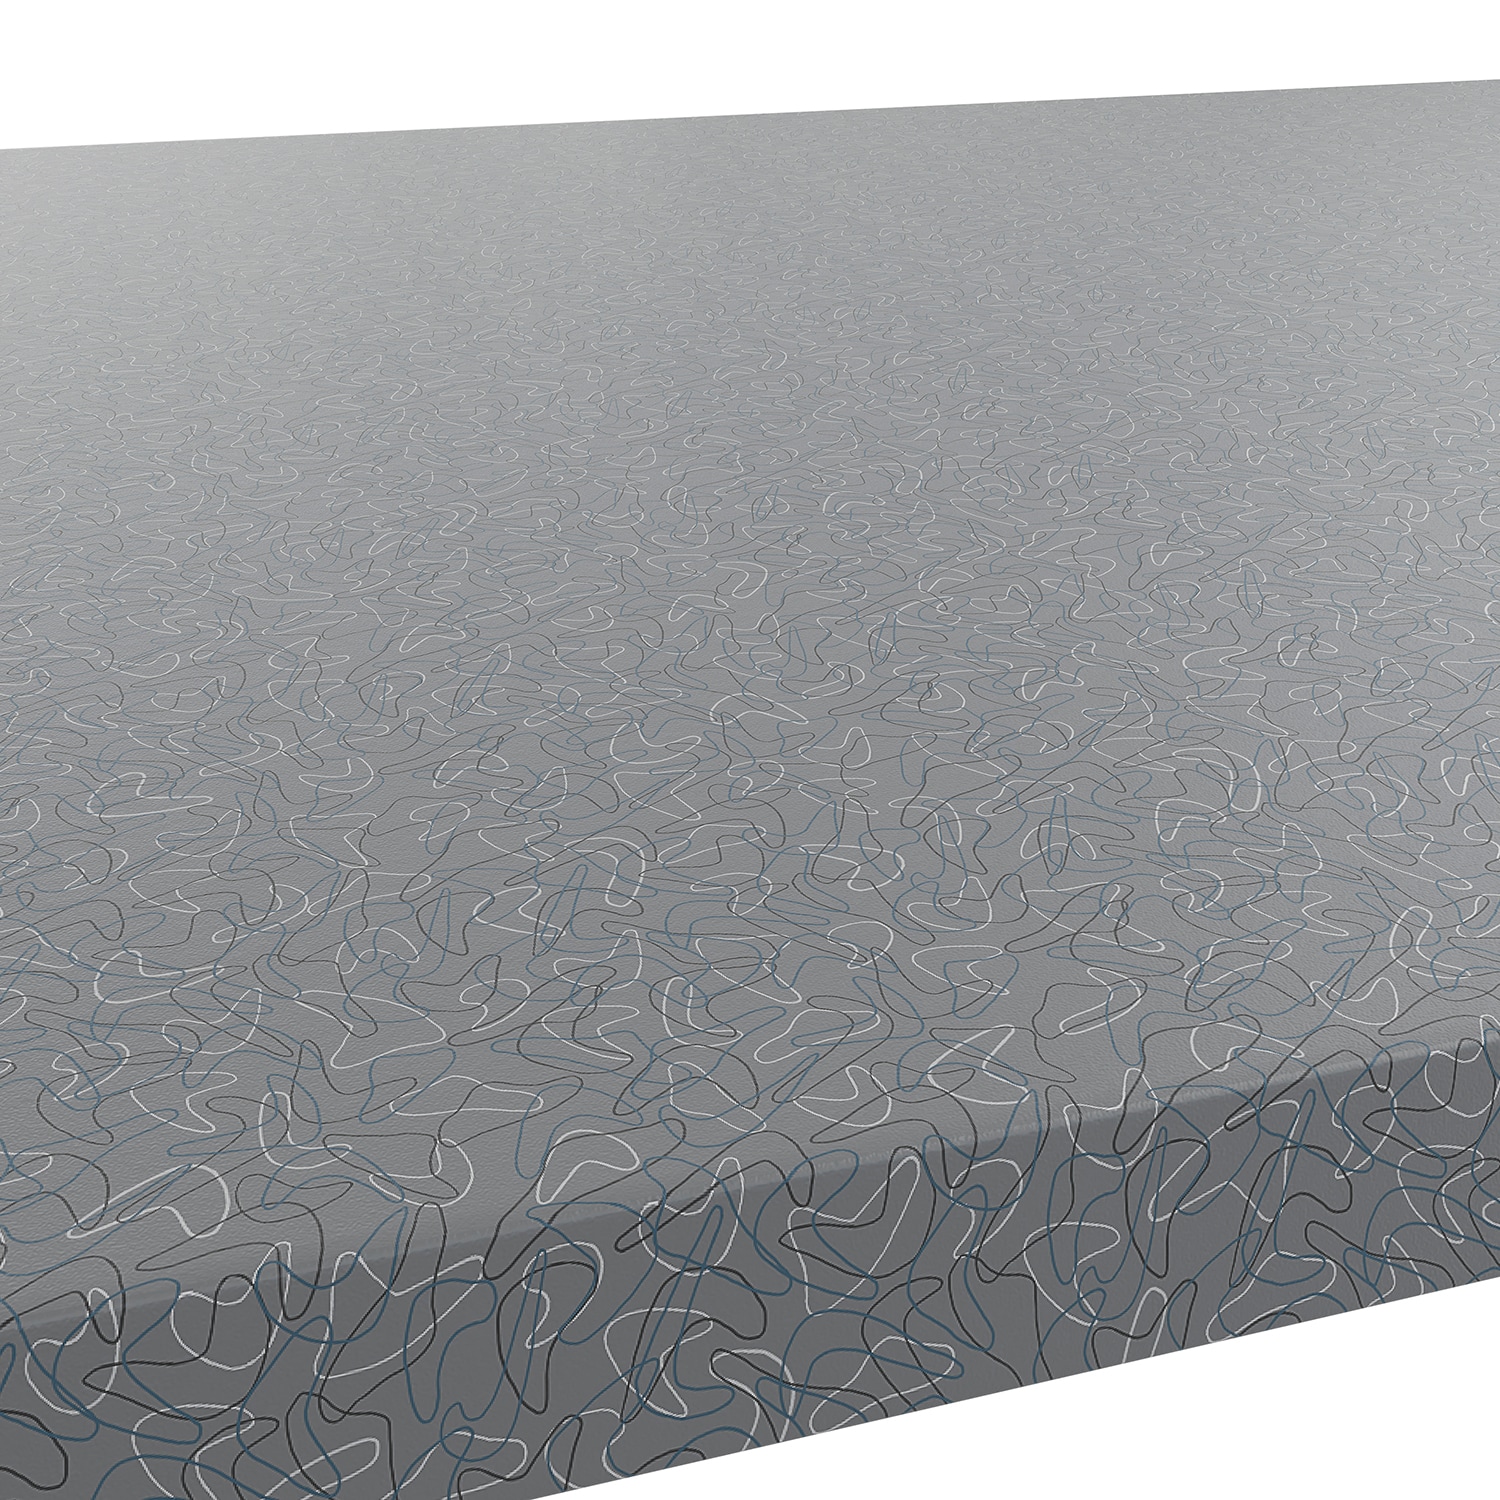 Formica Brand Laminate Patterns 48-in W x 96-in L Charcoal Boomerang Matte Laminate Sheet Cotton in Gray | 6942-58-48X96-000